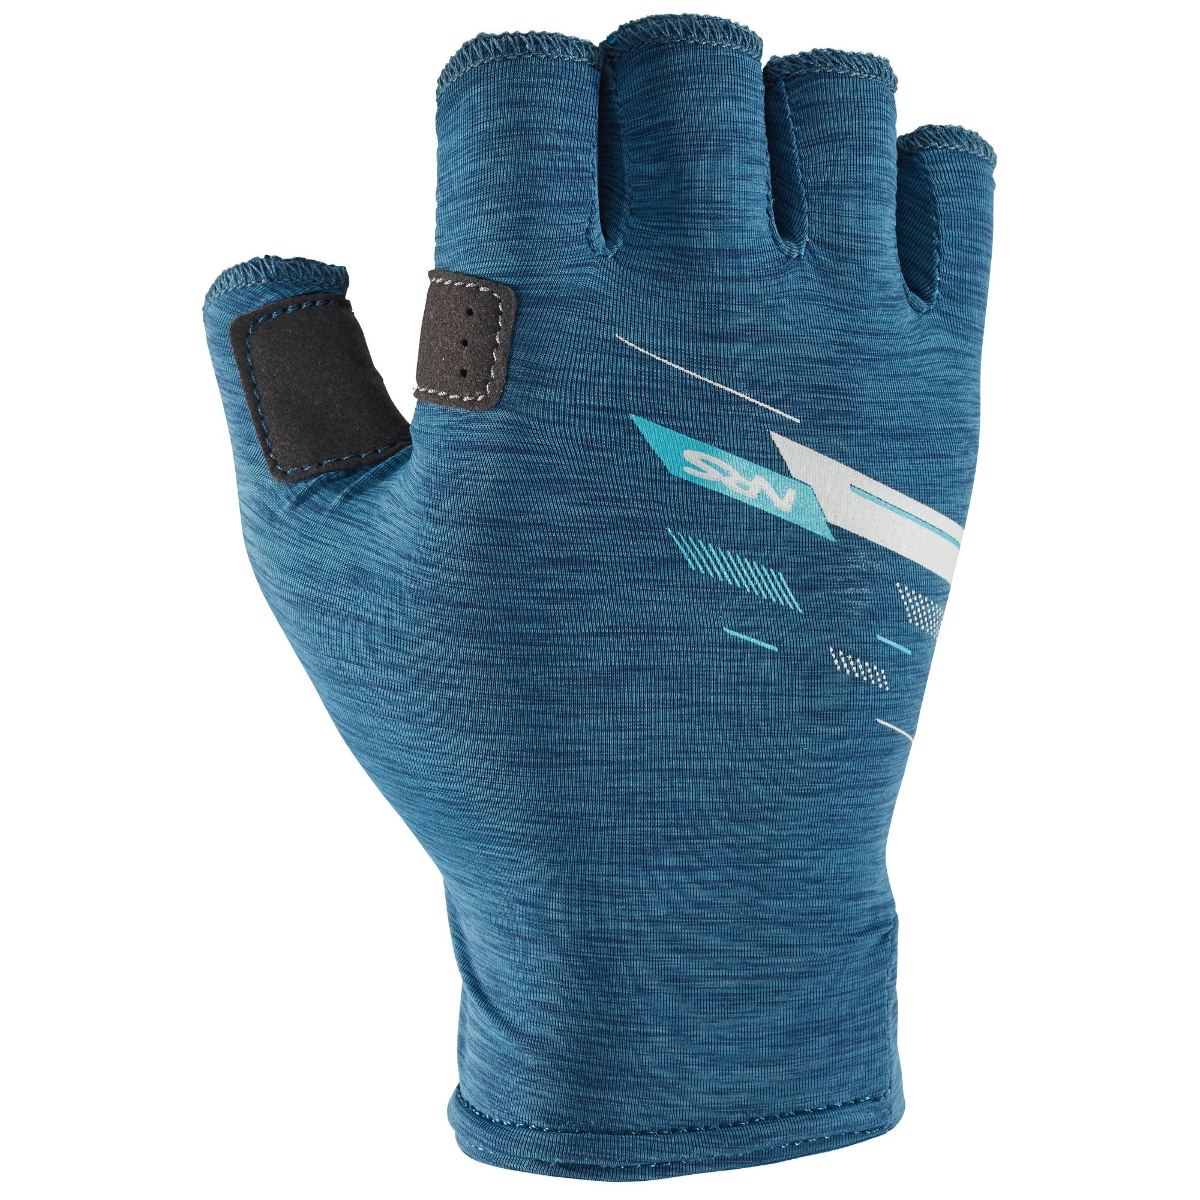 NRS Boater Gloves, Miesten